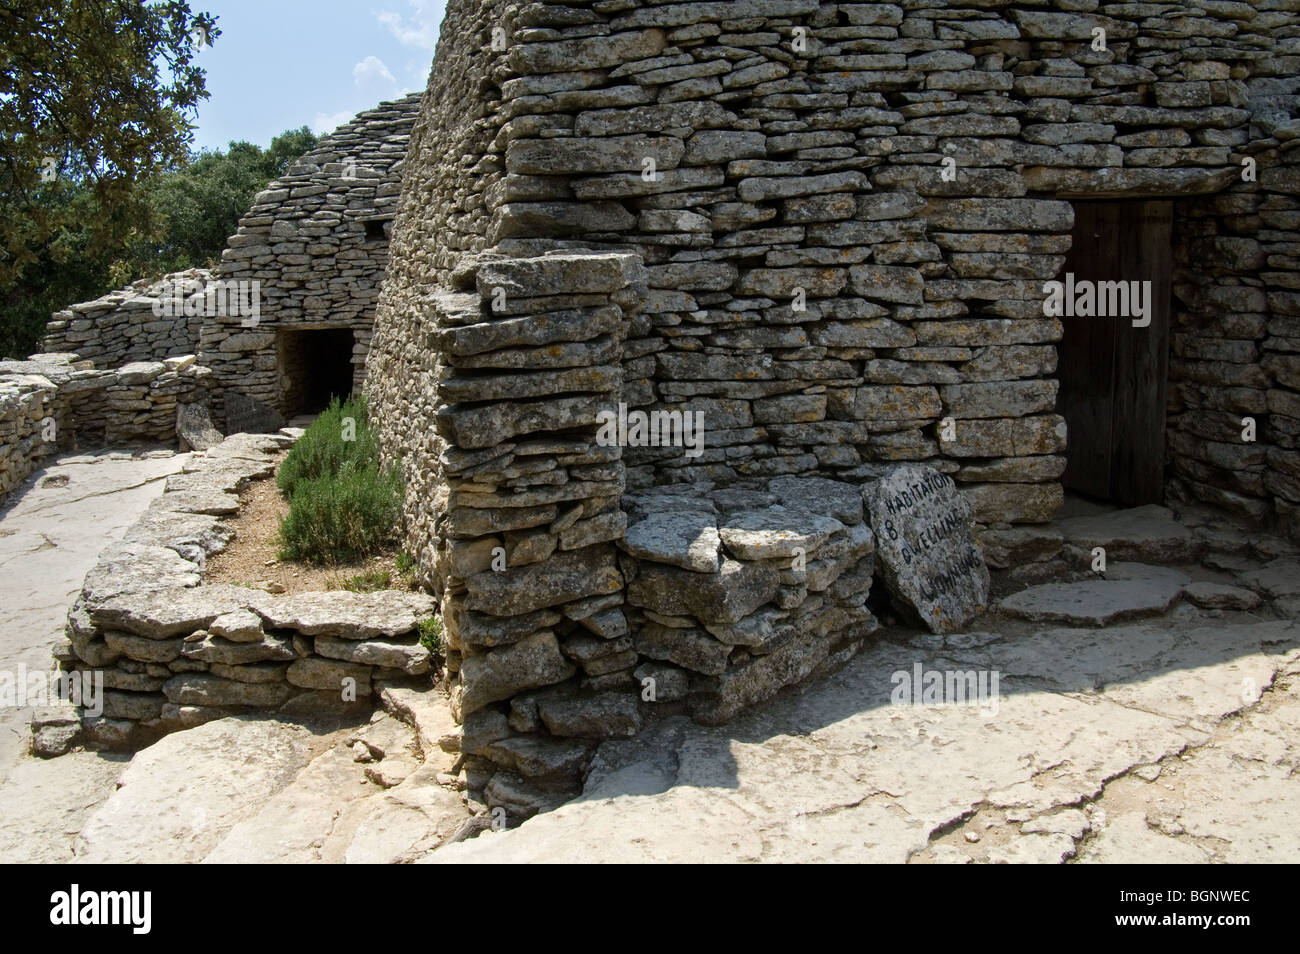 The restored village des Bories with its traditional stone Gallic huts, Gordes, Vaucluse, Provence, France Stock Photo